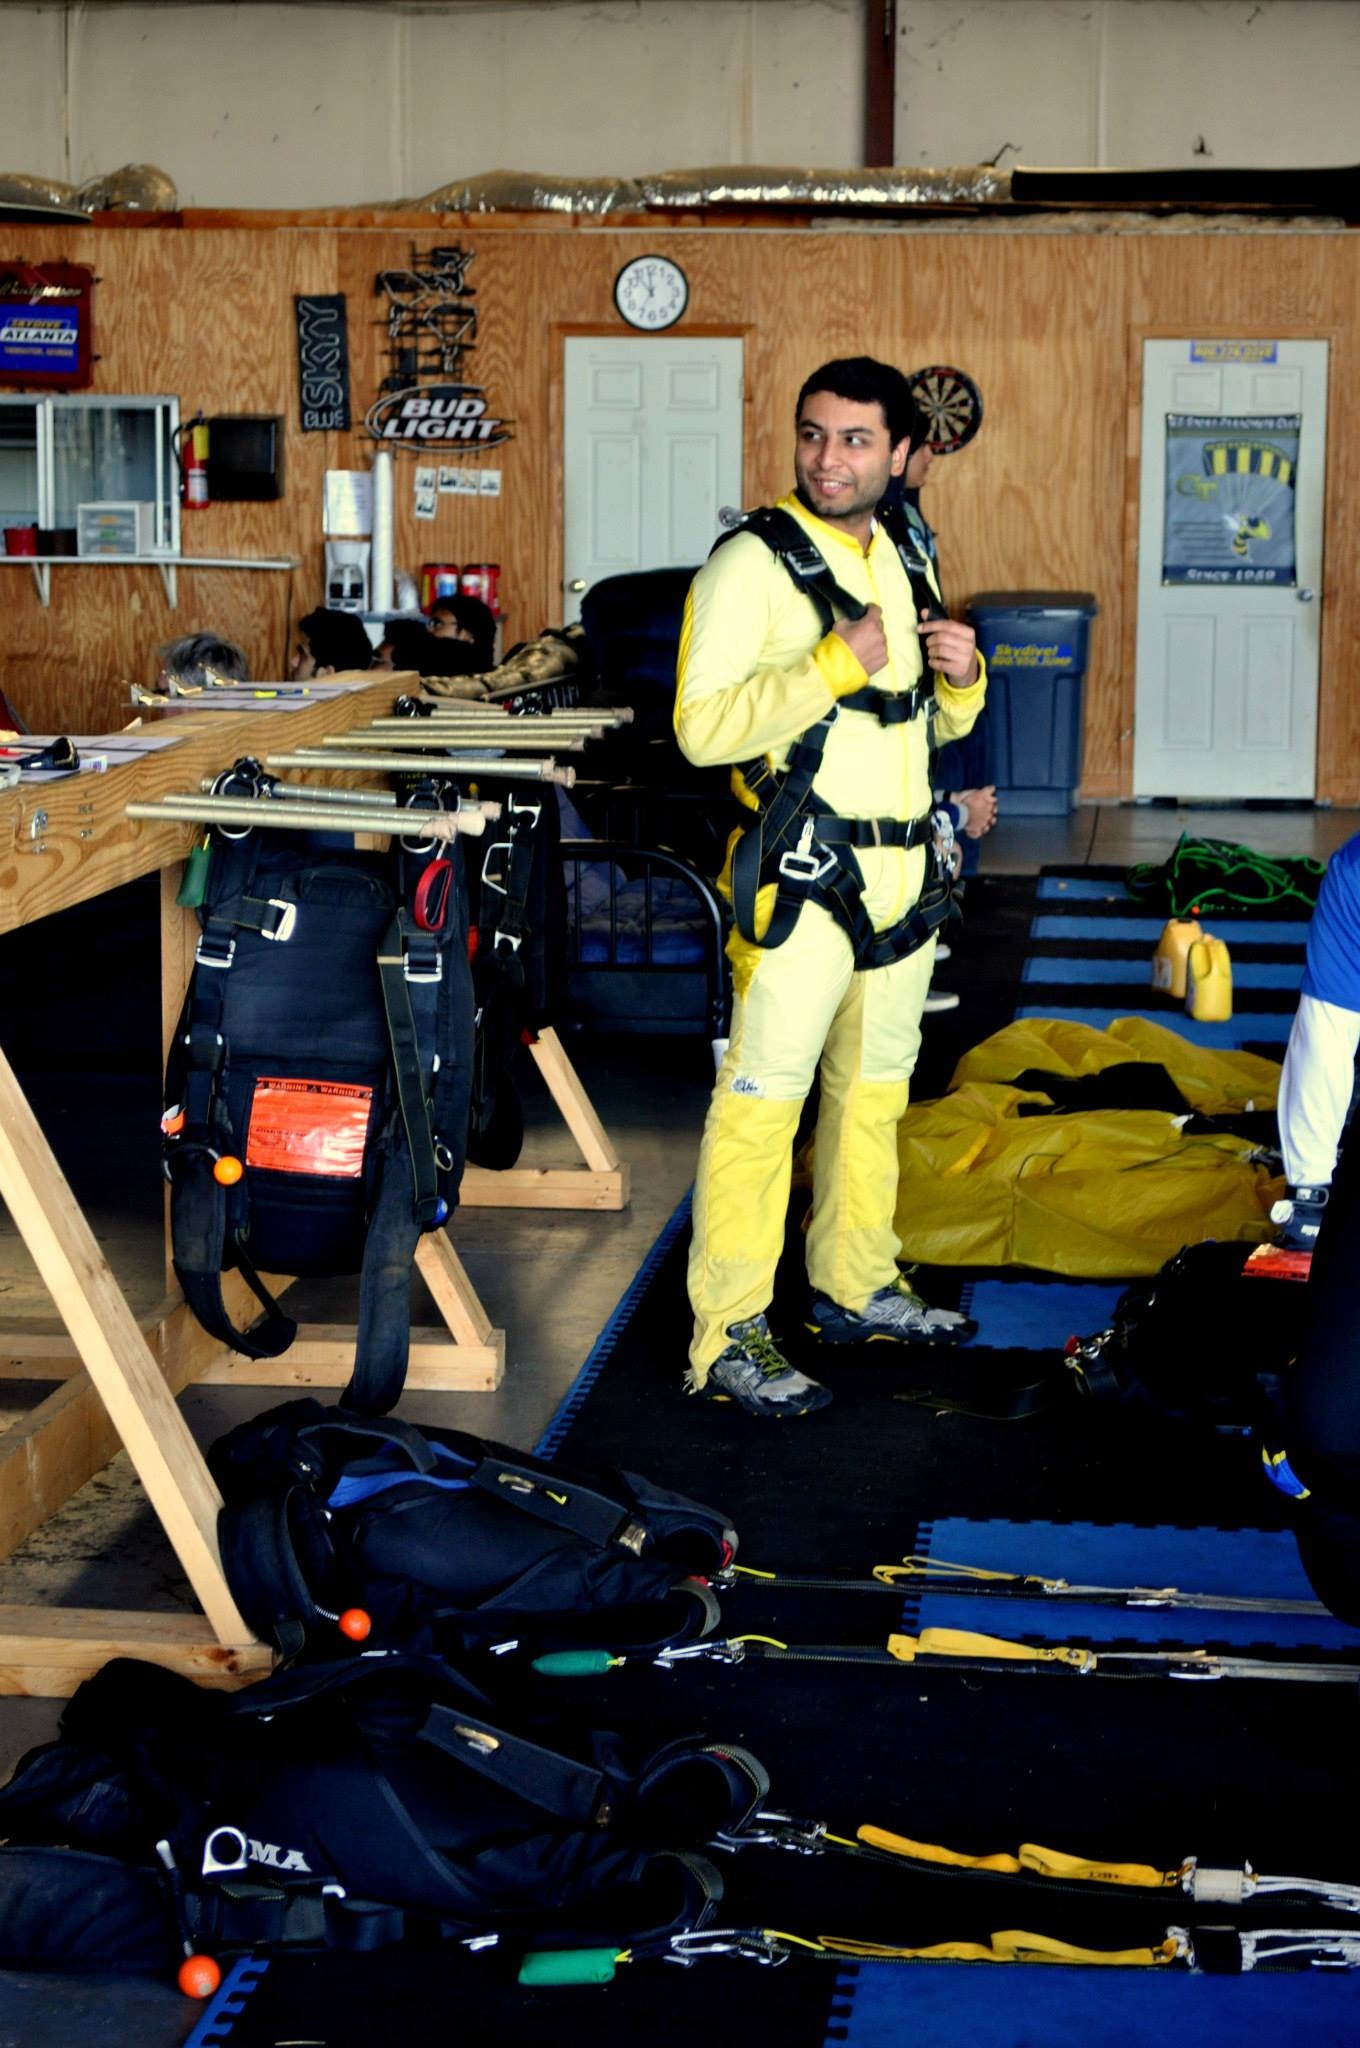 A student prepares to skydive at Skydive Atlanta, an event hosted by TechList in fall 2013.Image courtesy of TechList.